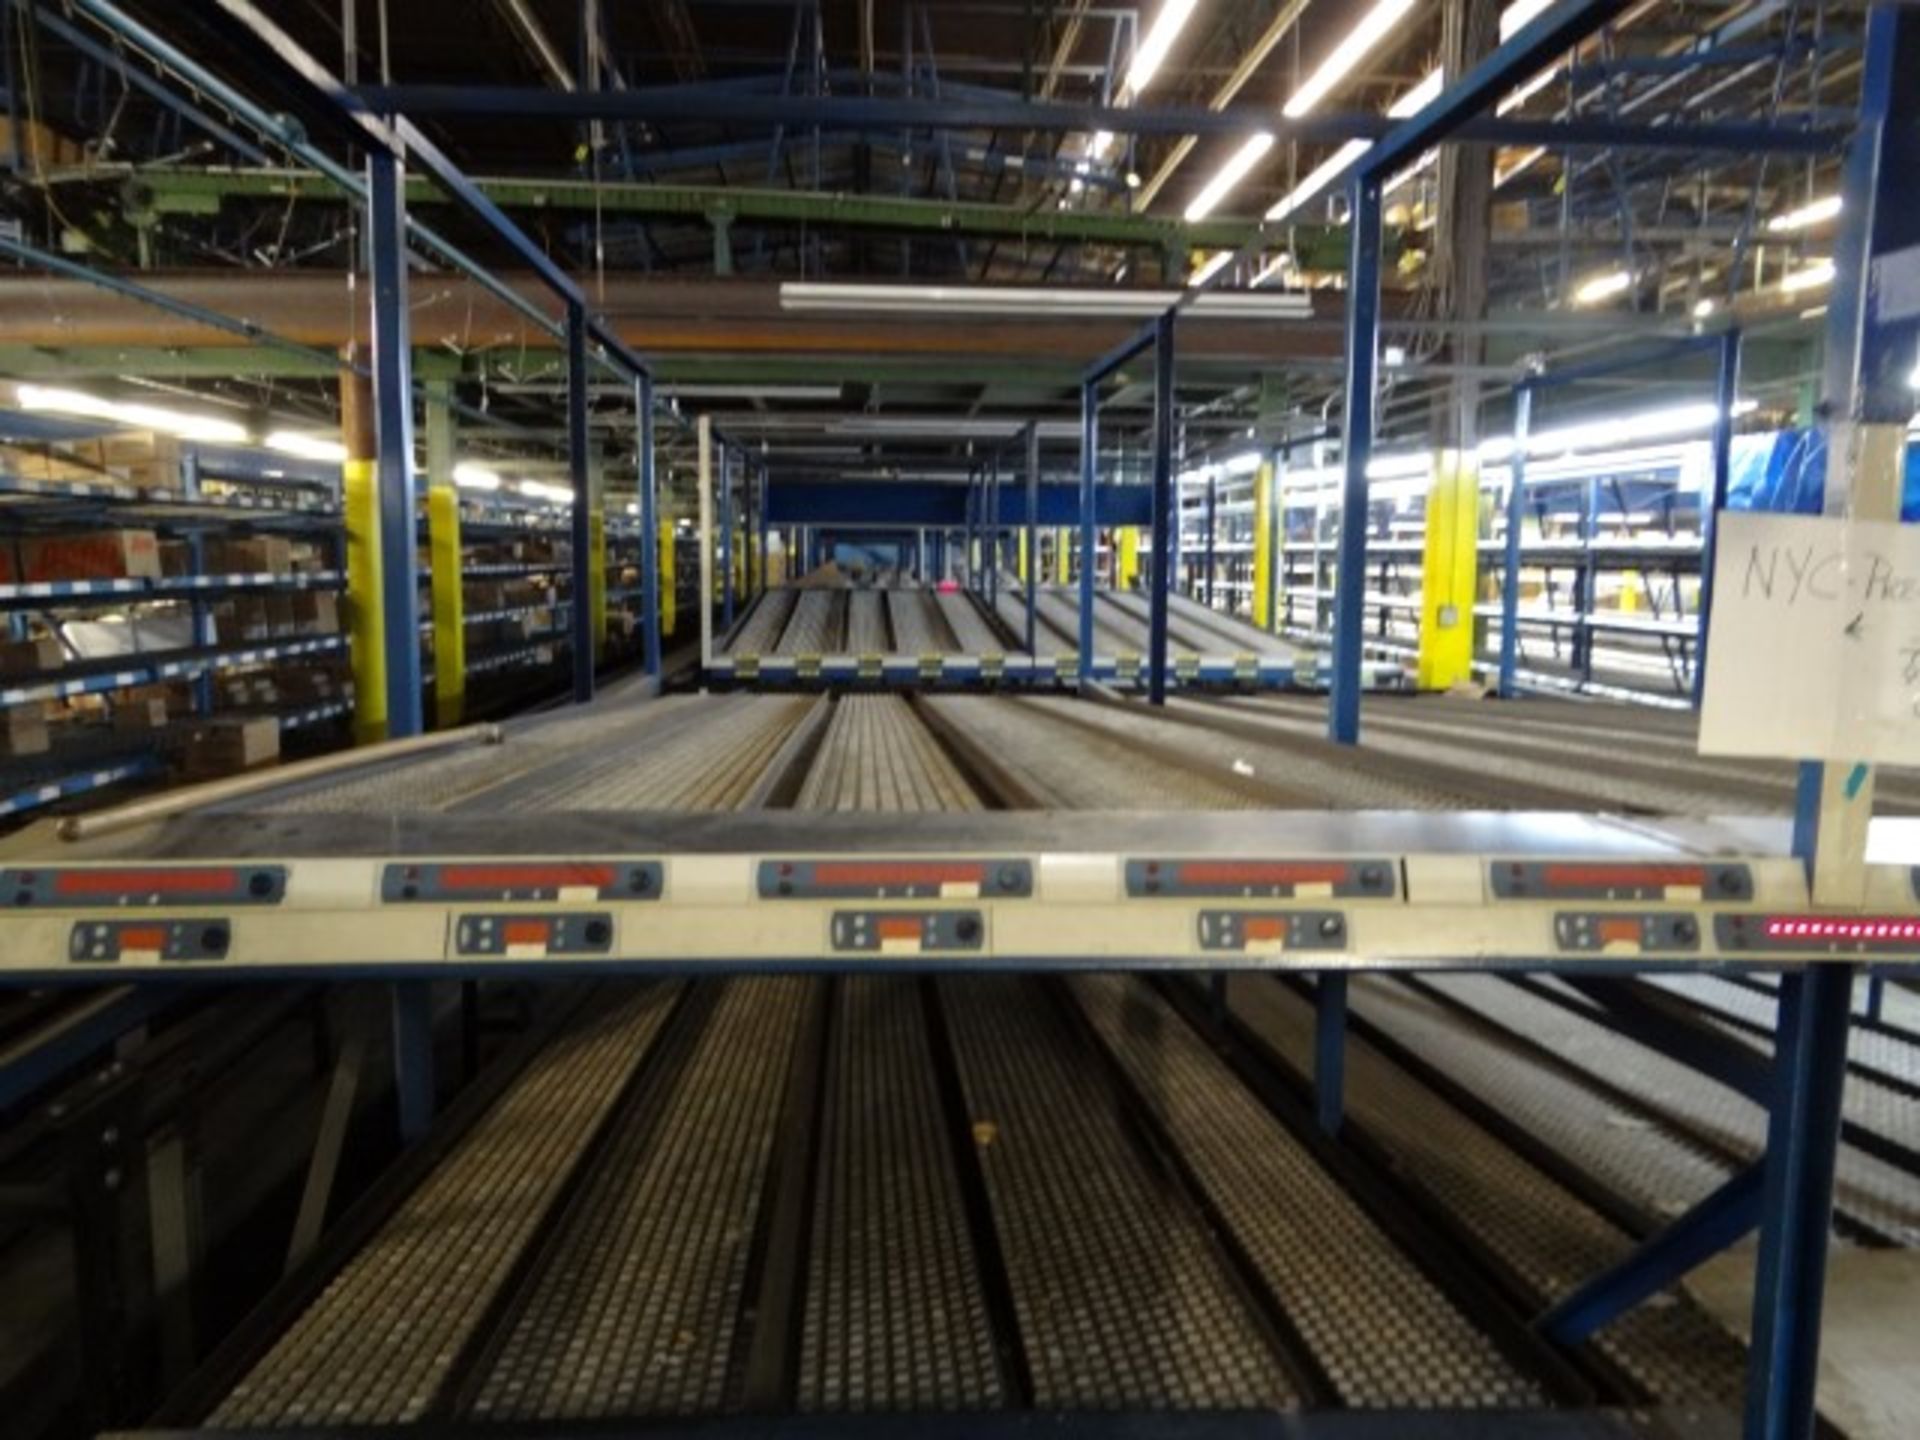 Tech King Cigarette Pick to Light System with 6 Pick Stations, Conveyors, Flow Racks, Box Tram and - Image 57 of 57